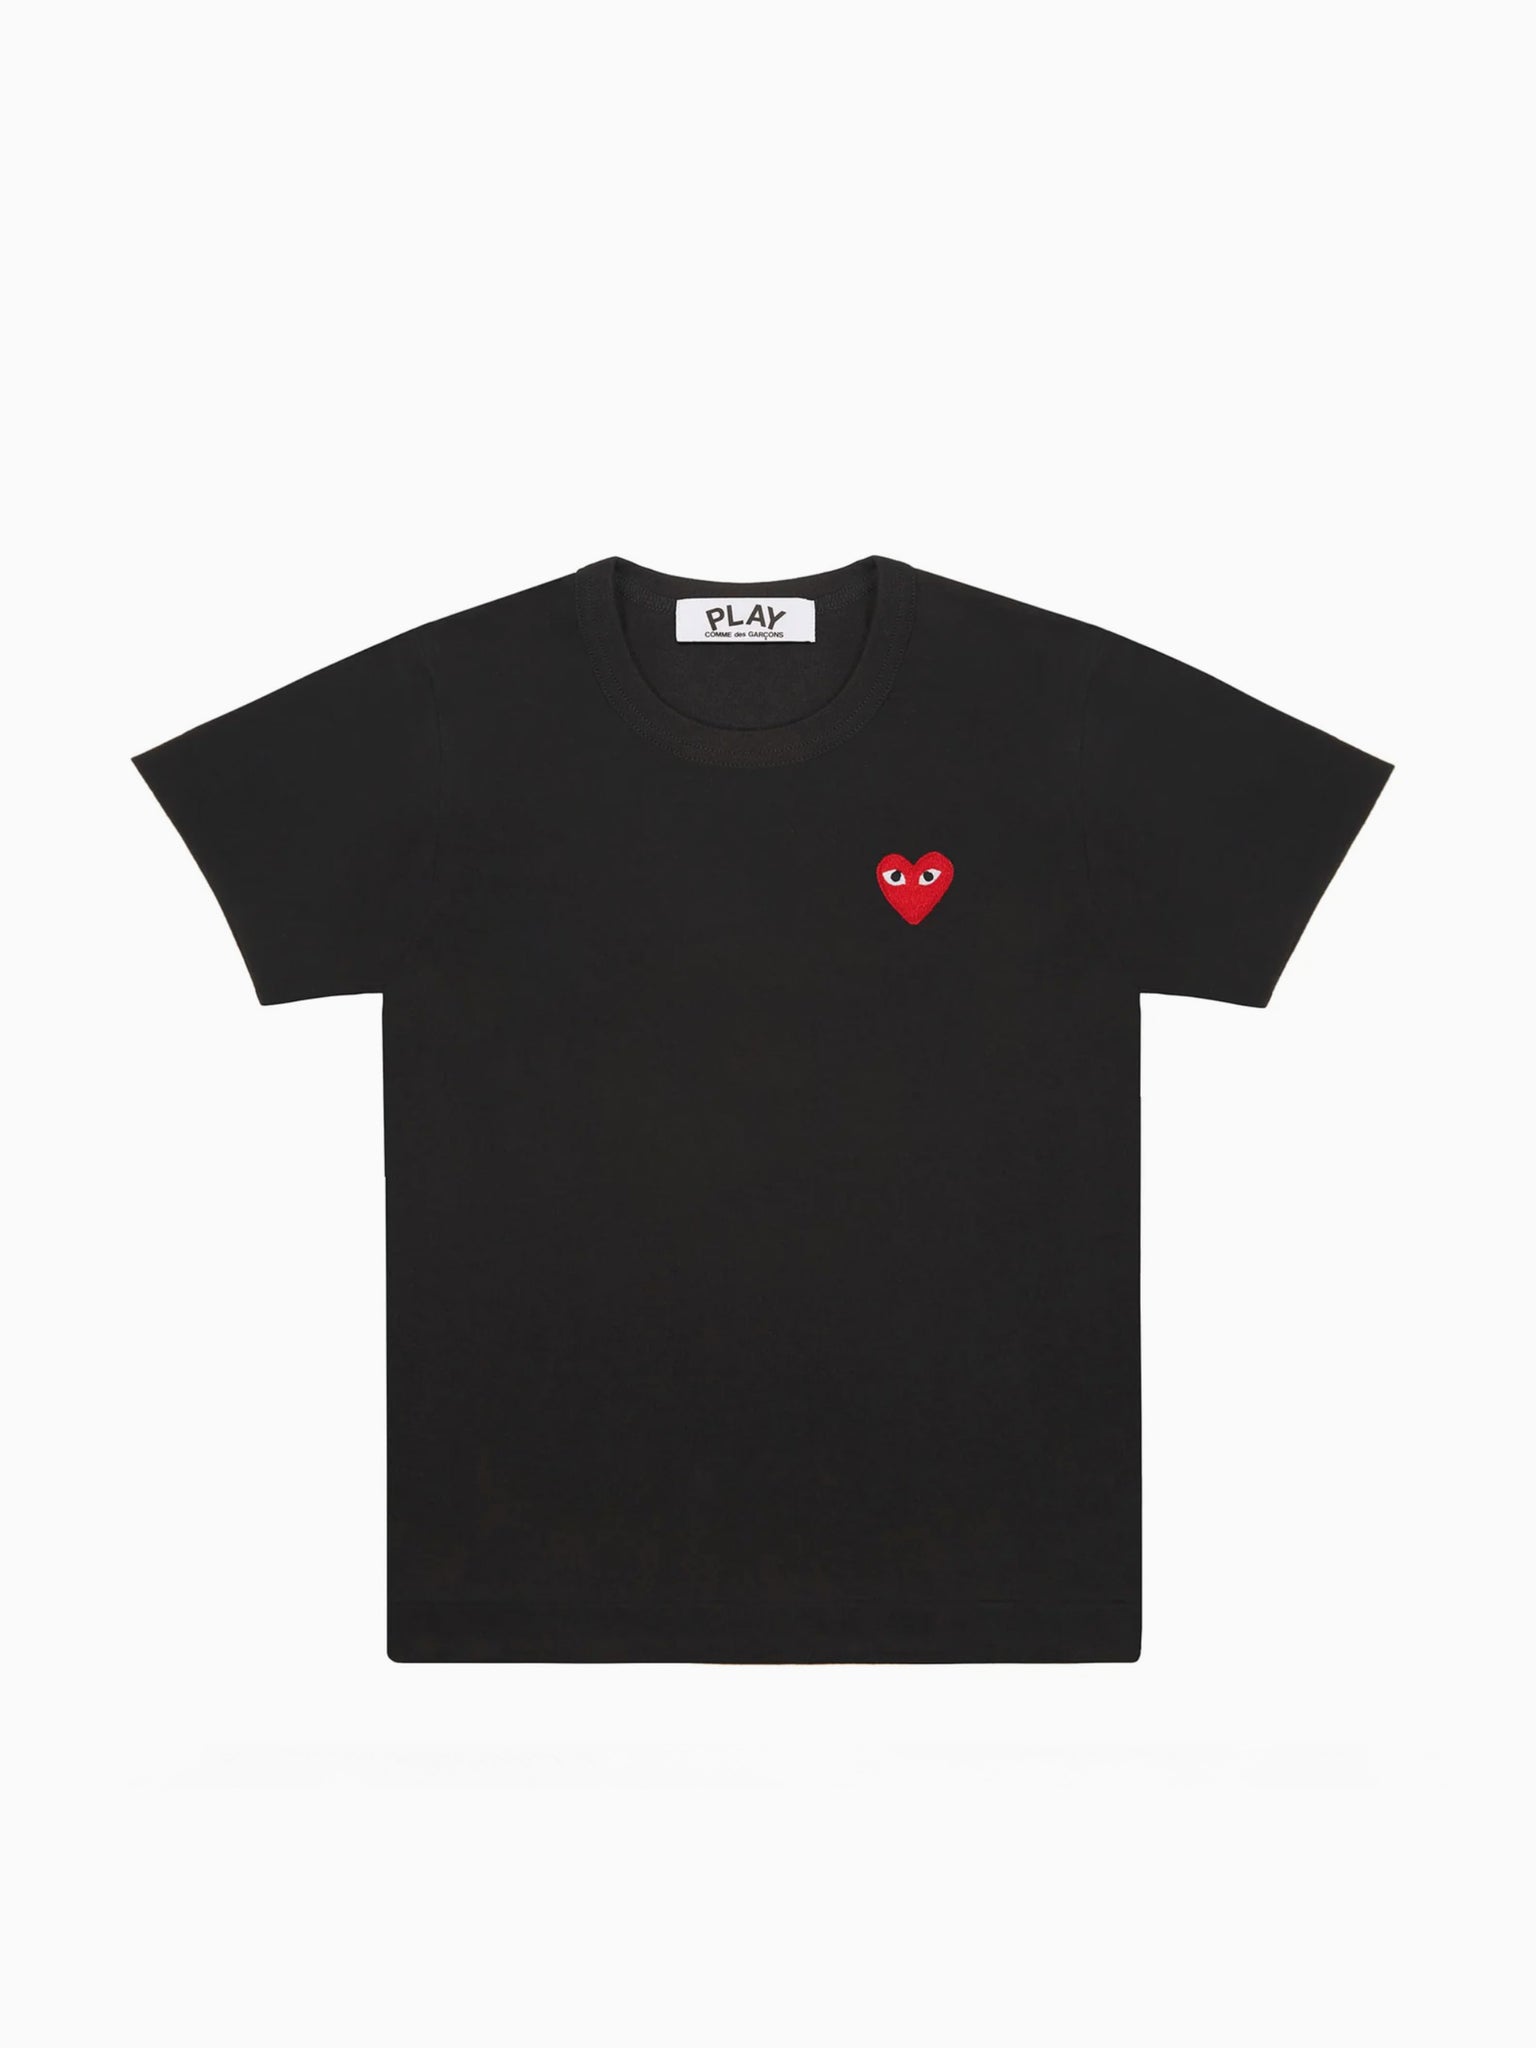 Men's Fit T-Shirt Black with Red Heart